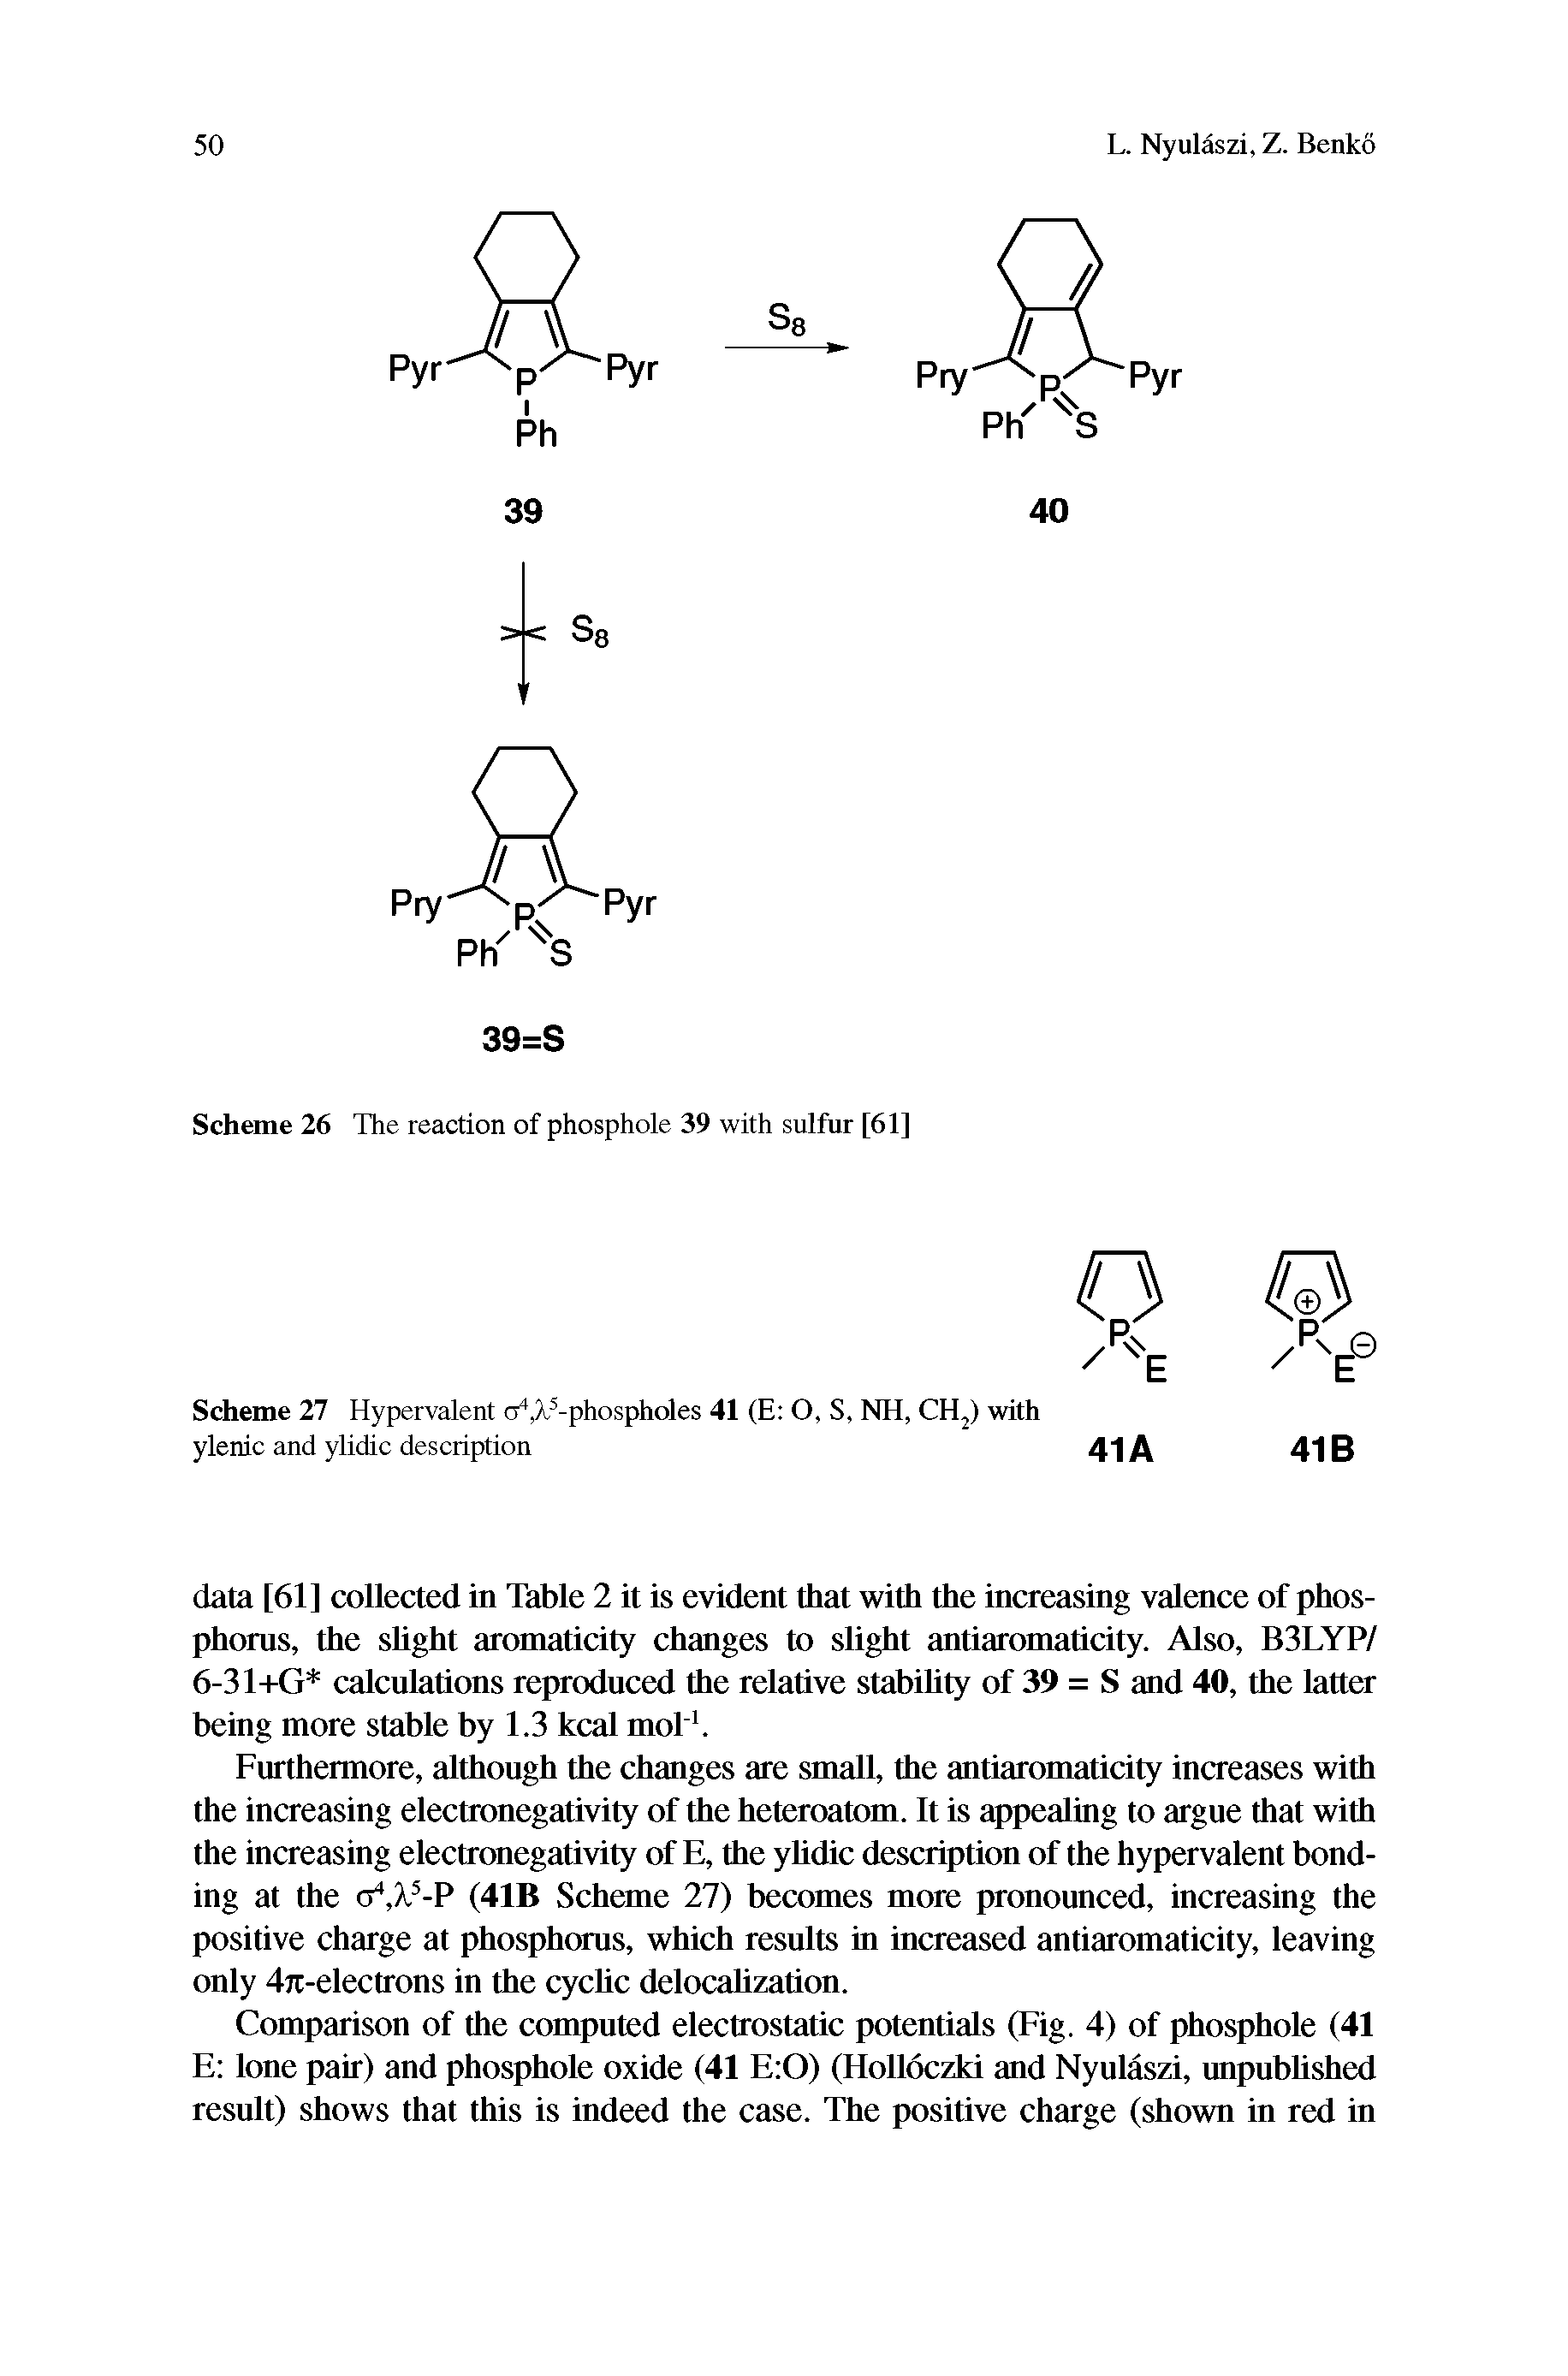 Scheme 27 Hypervalent a. / -phospholes 41 (E O, S, NH, CH2) with ylenic and ylidic description...